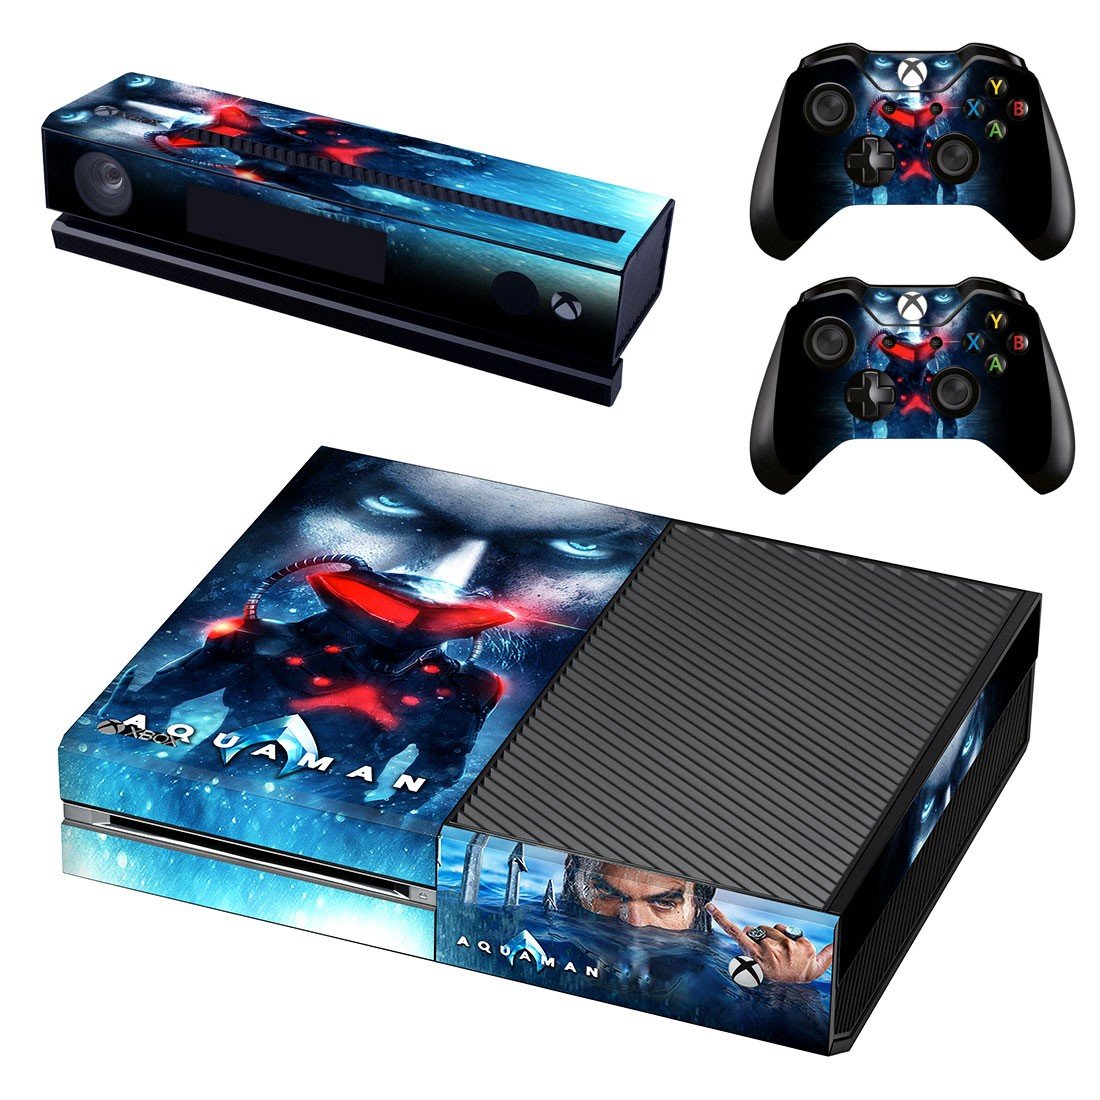 Xbox One And Controllers Skin Cover AquaMan